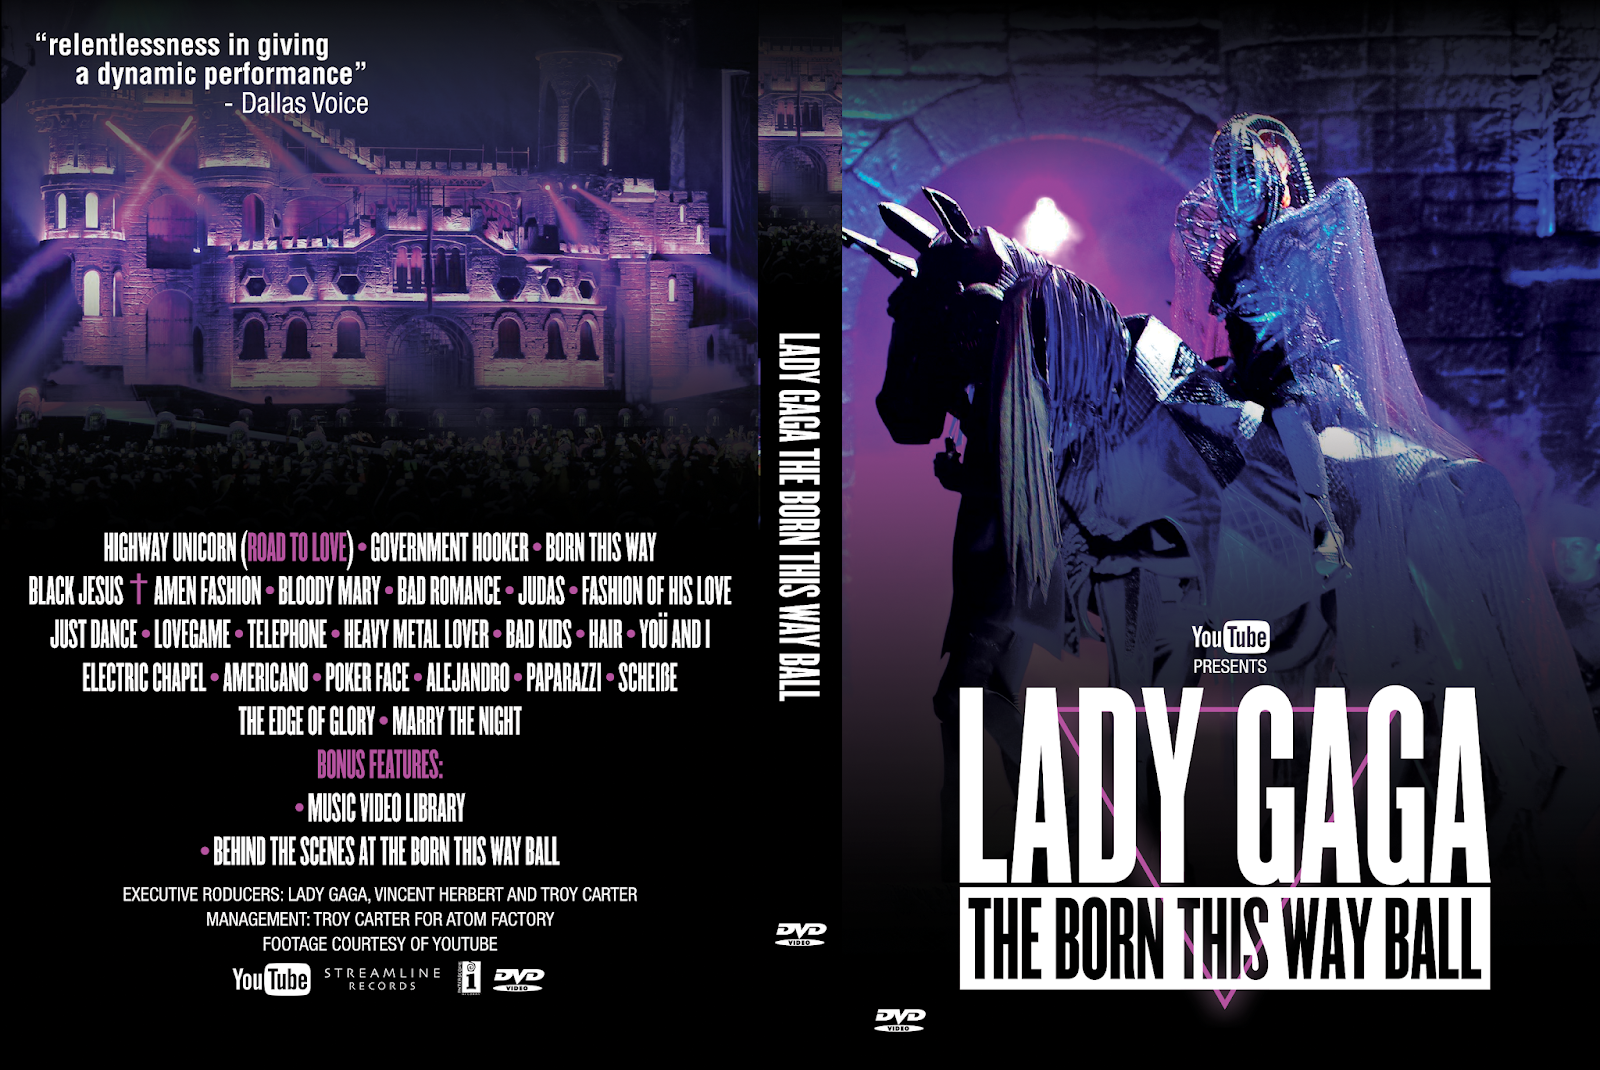 Lady Gaga Fanmade Covers: The Born This Way Ball - DVD